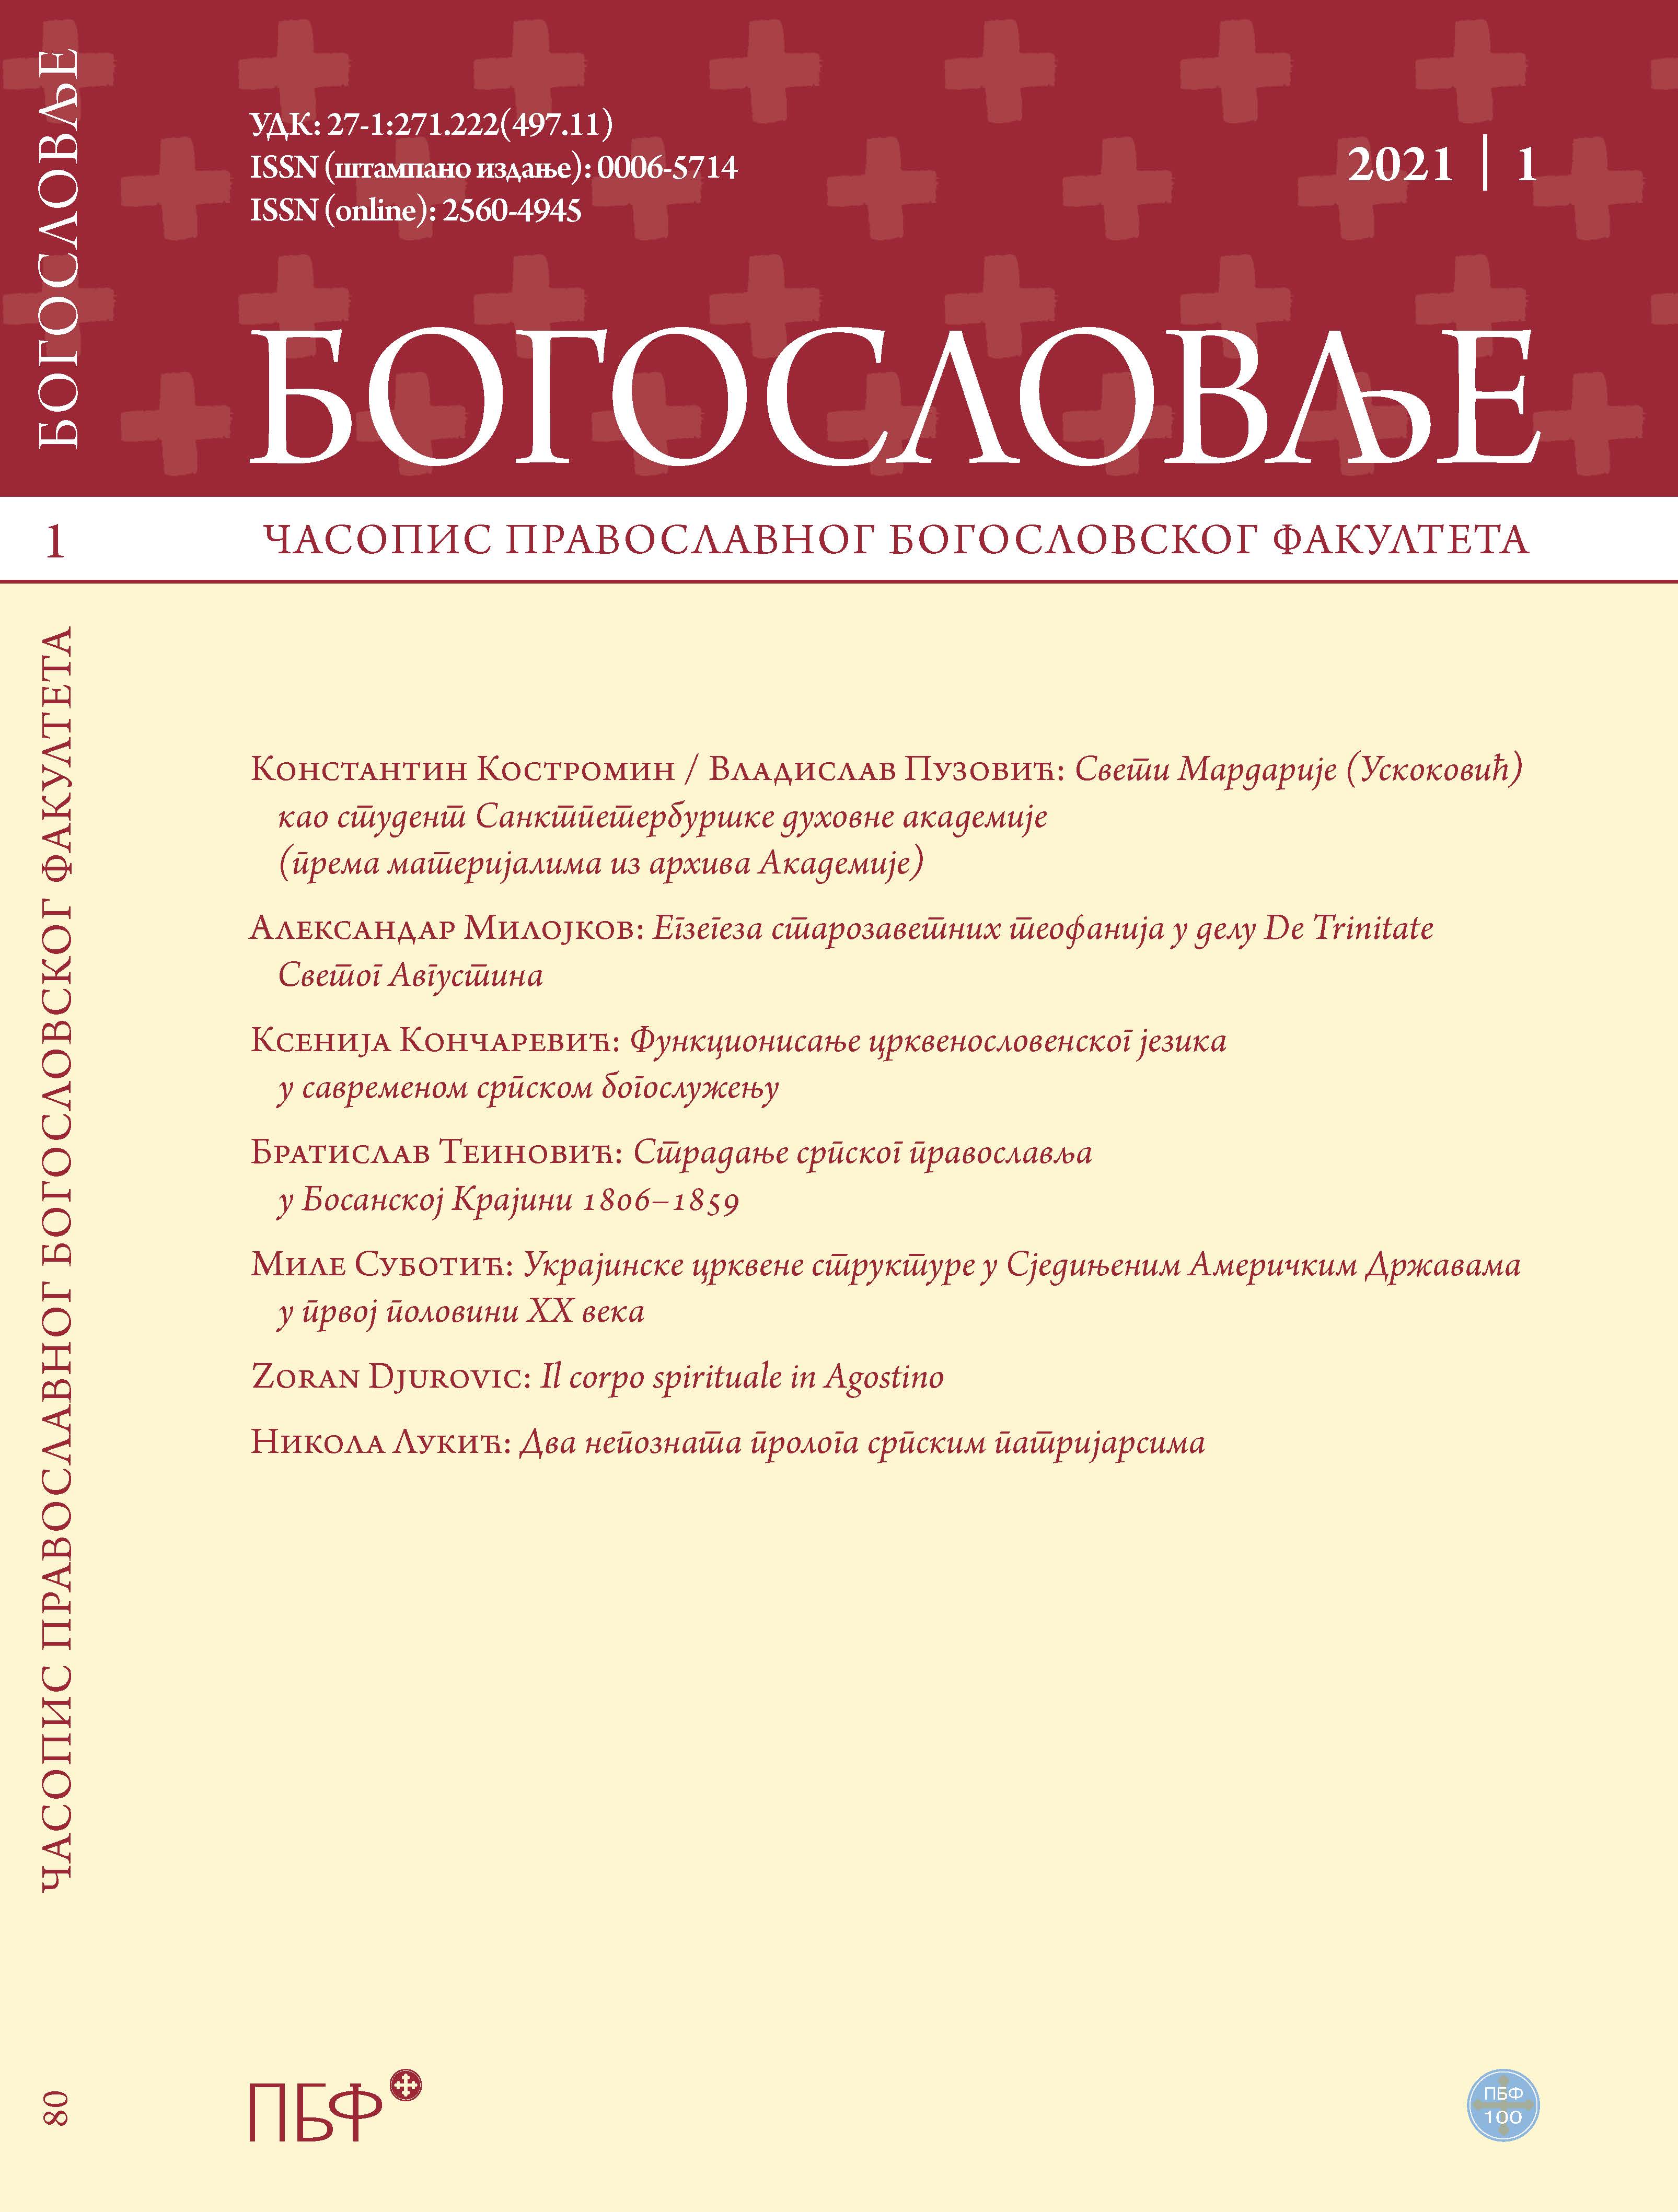 Functioning of the Church Slavonic Language in Contemporary Serbian Worship Cover Image